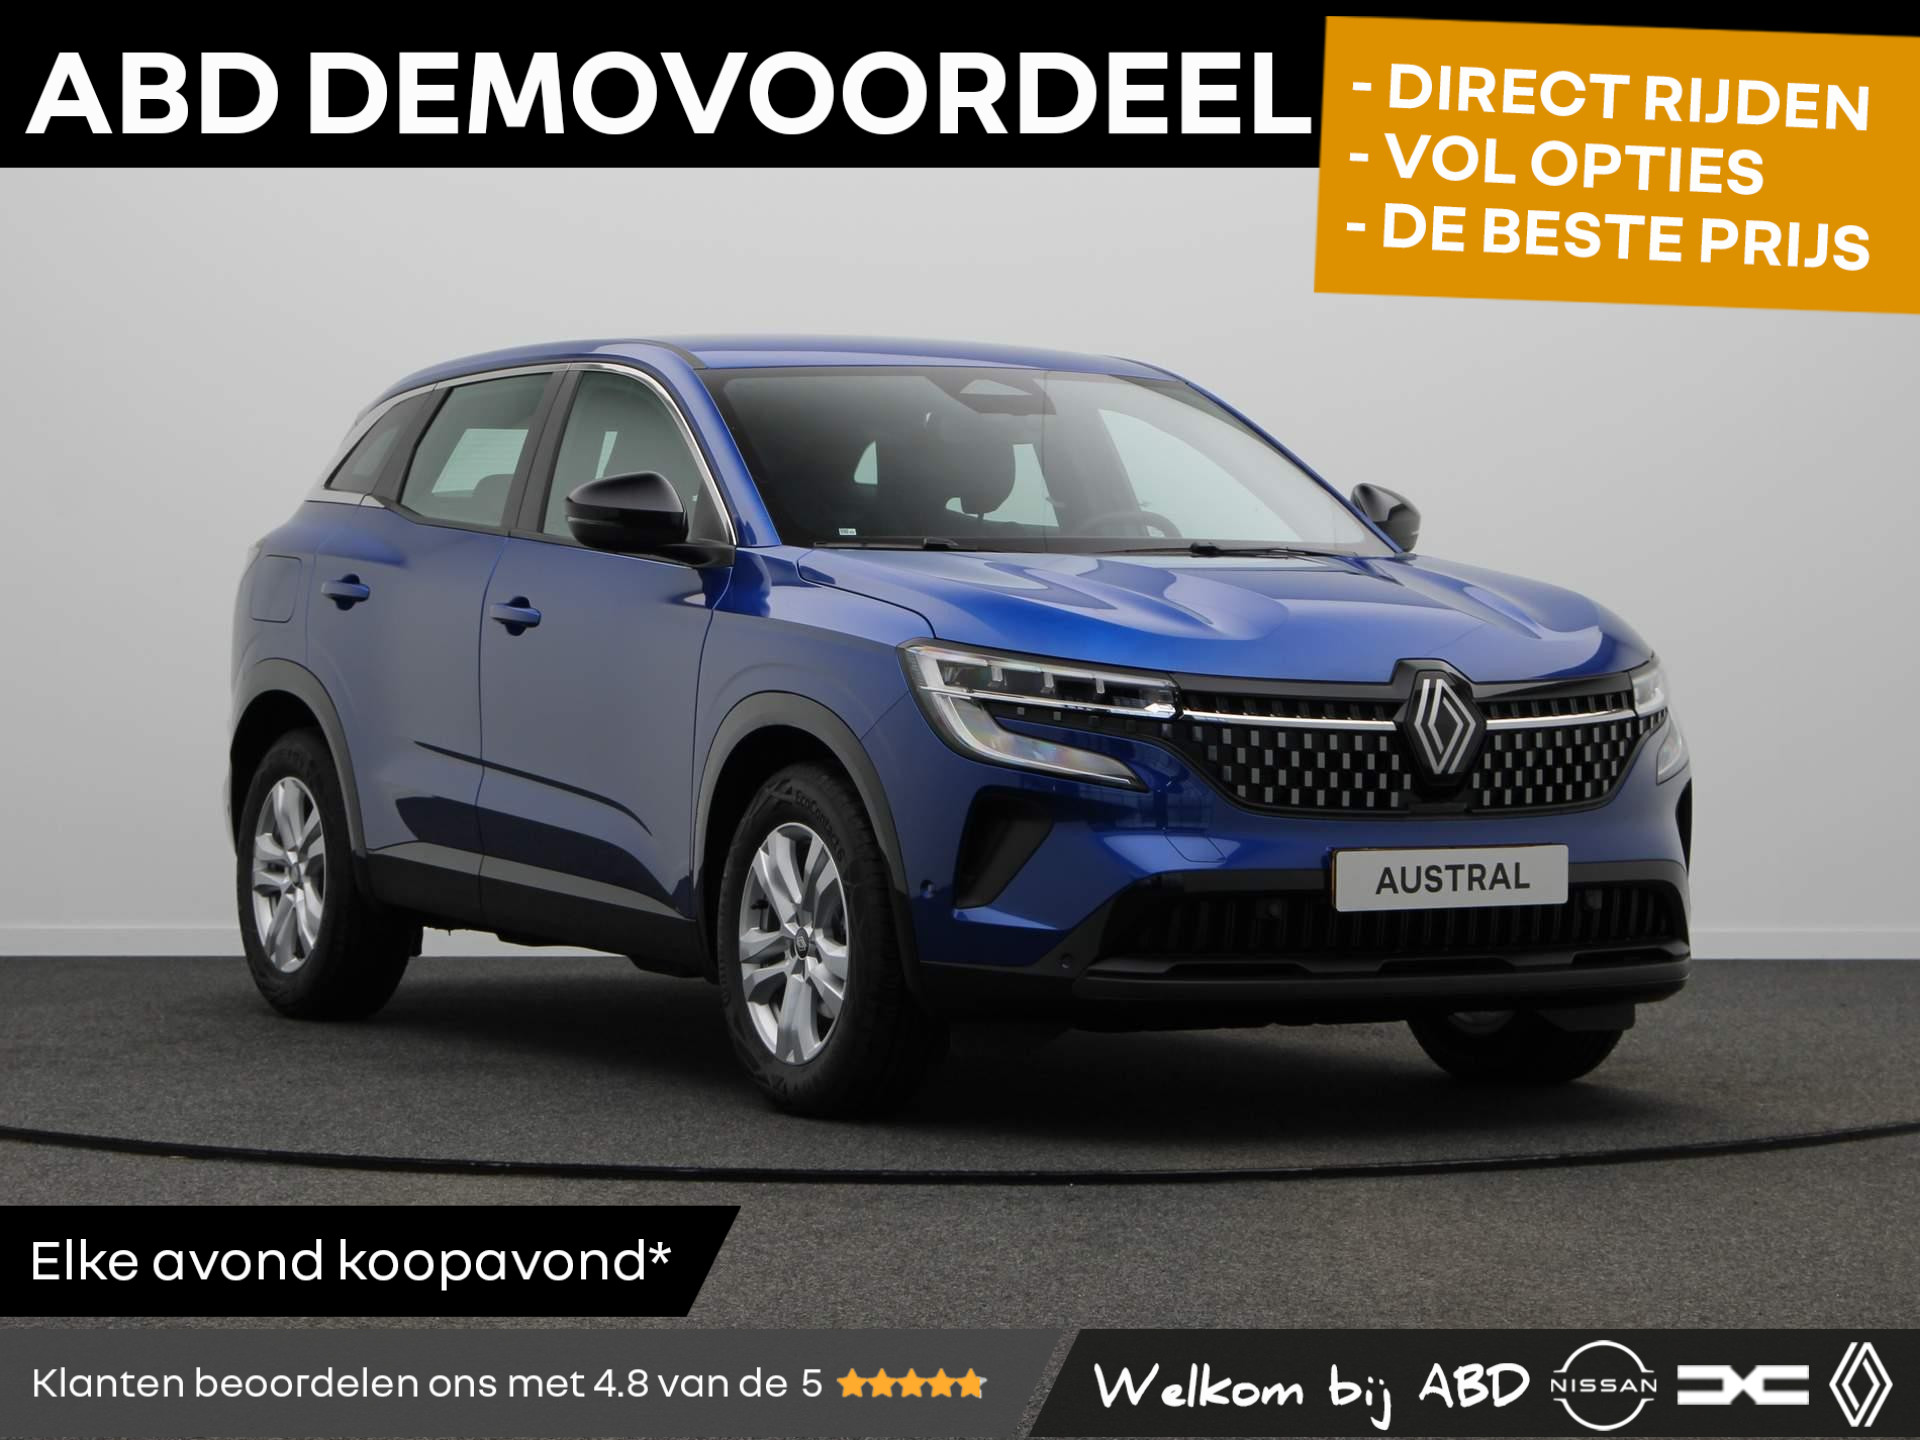 Renault Austral Mild Hybrid Advanced 130pk Equilibre | Achteruitrijcamera | Cruise control | Climate control | Keyless entry | bij viaBOVAG.nl